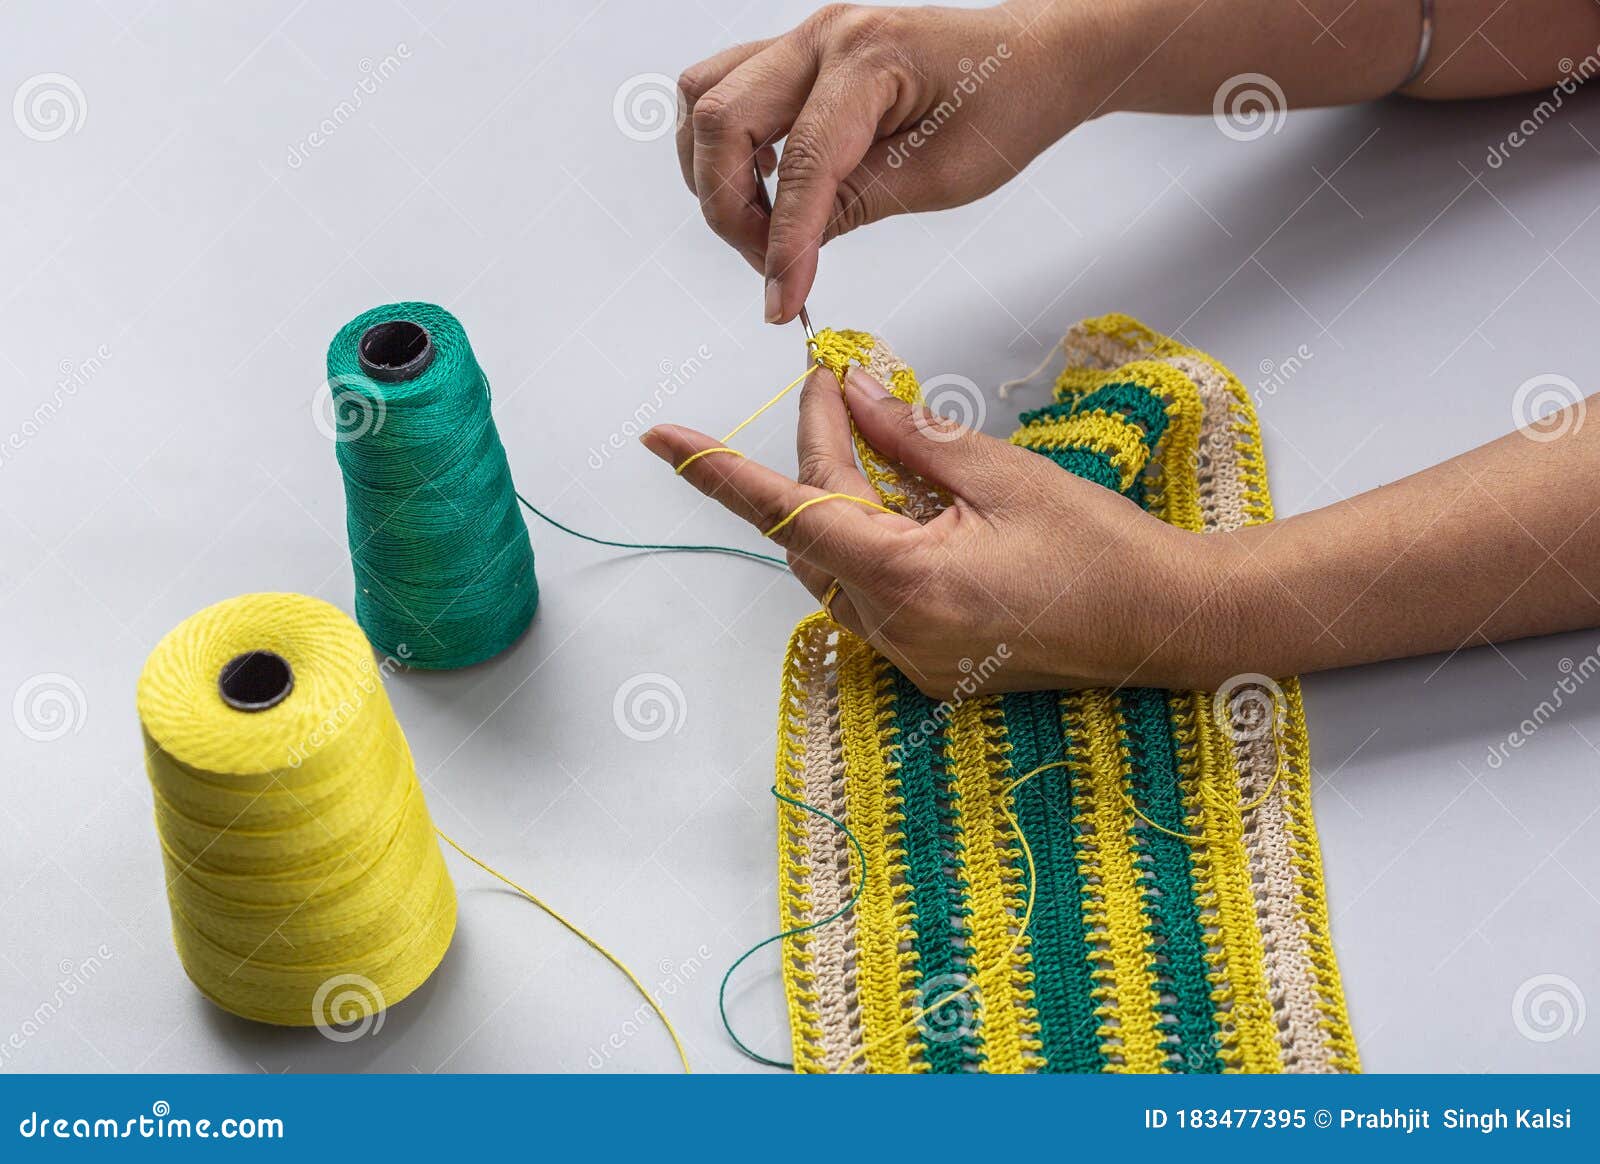 Woman Crocheting Pattern with Crochet Hook Close-up Stock Image - Image of  colored, fashion: 183477395